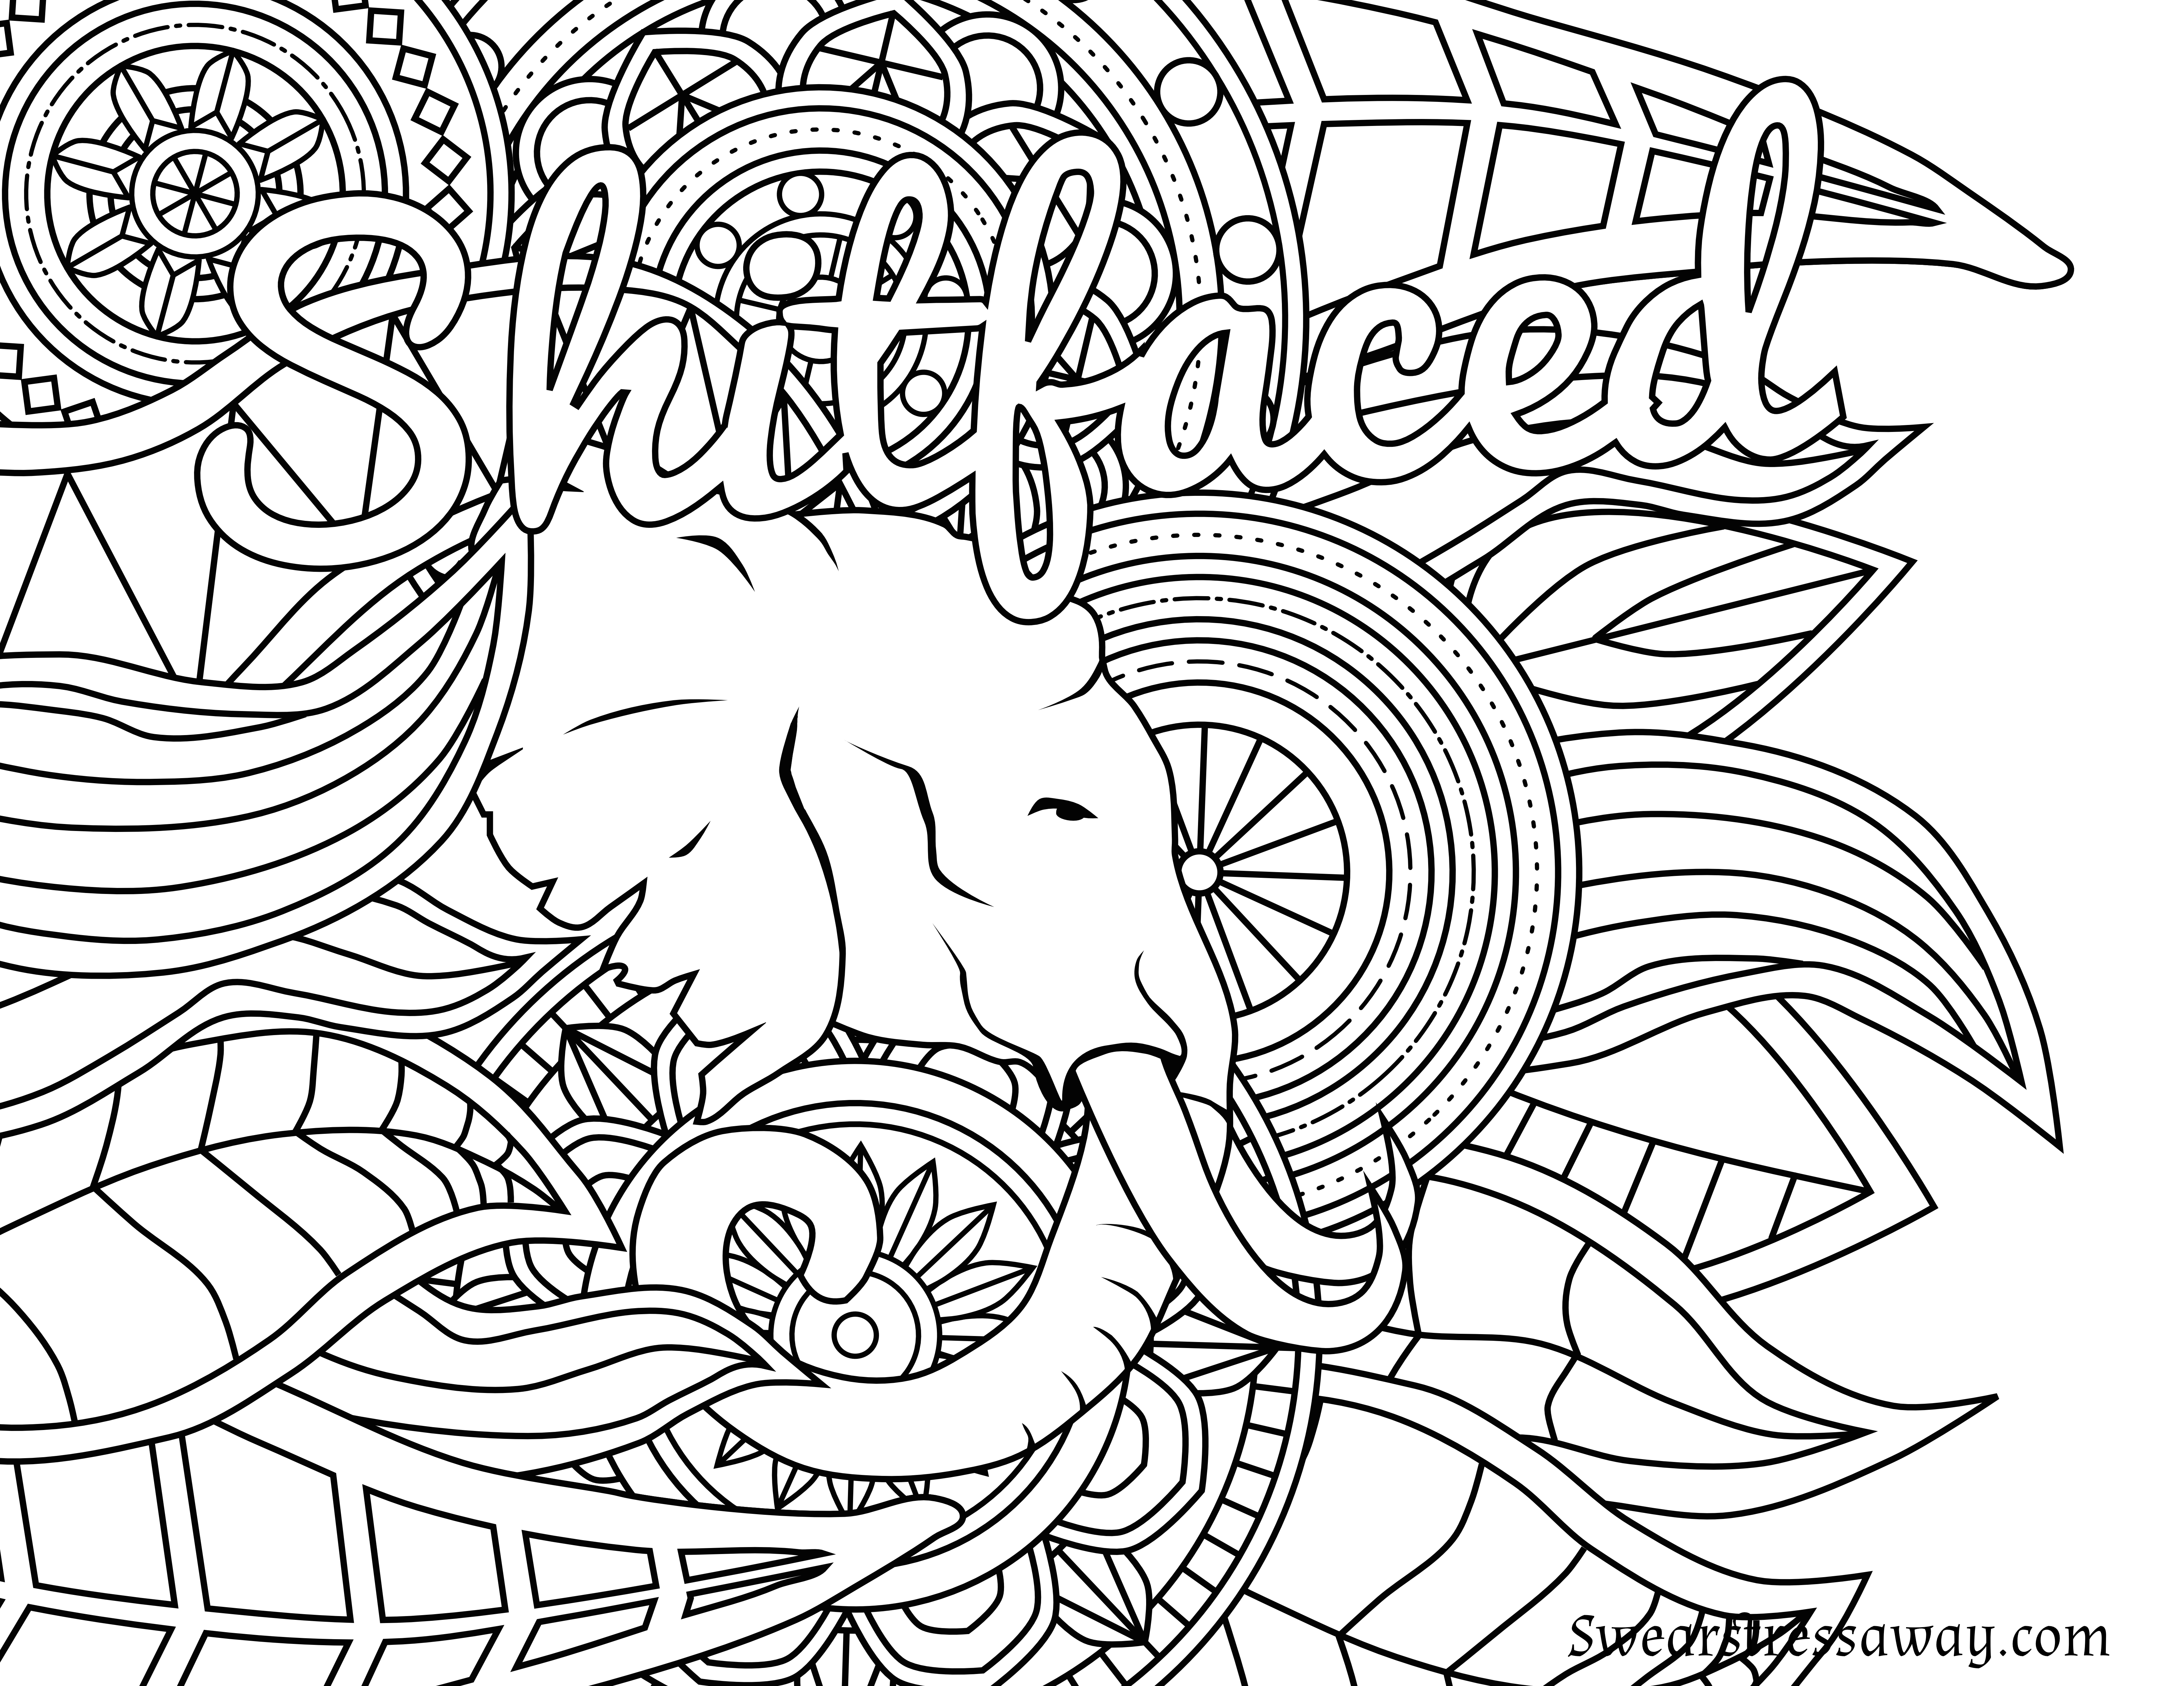 Free Printable Coloring Page - Shitfaced - Swear Word Coloring Page - Free Printable Coloring Pages For Adults Only Swear Words